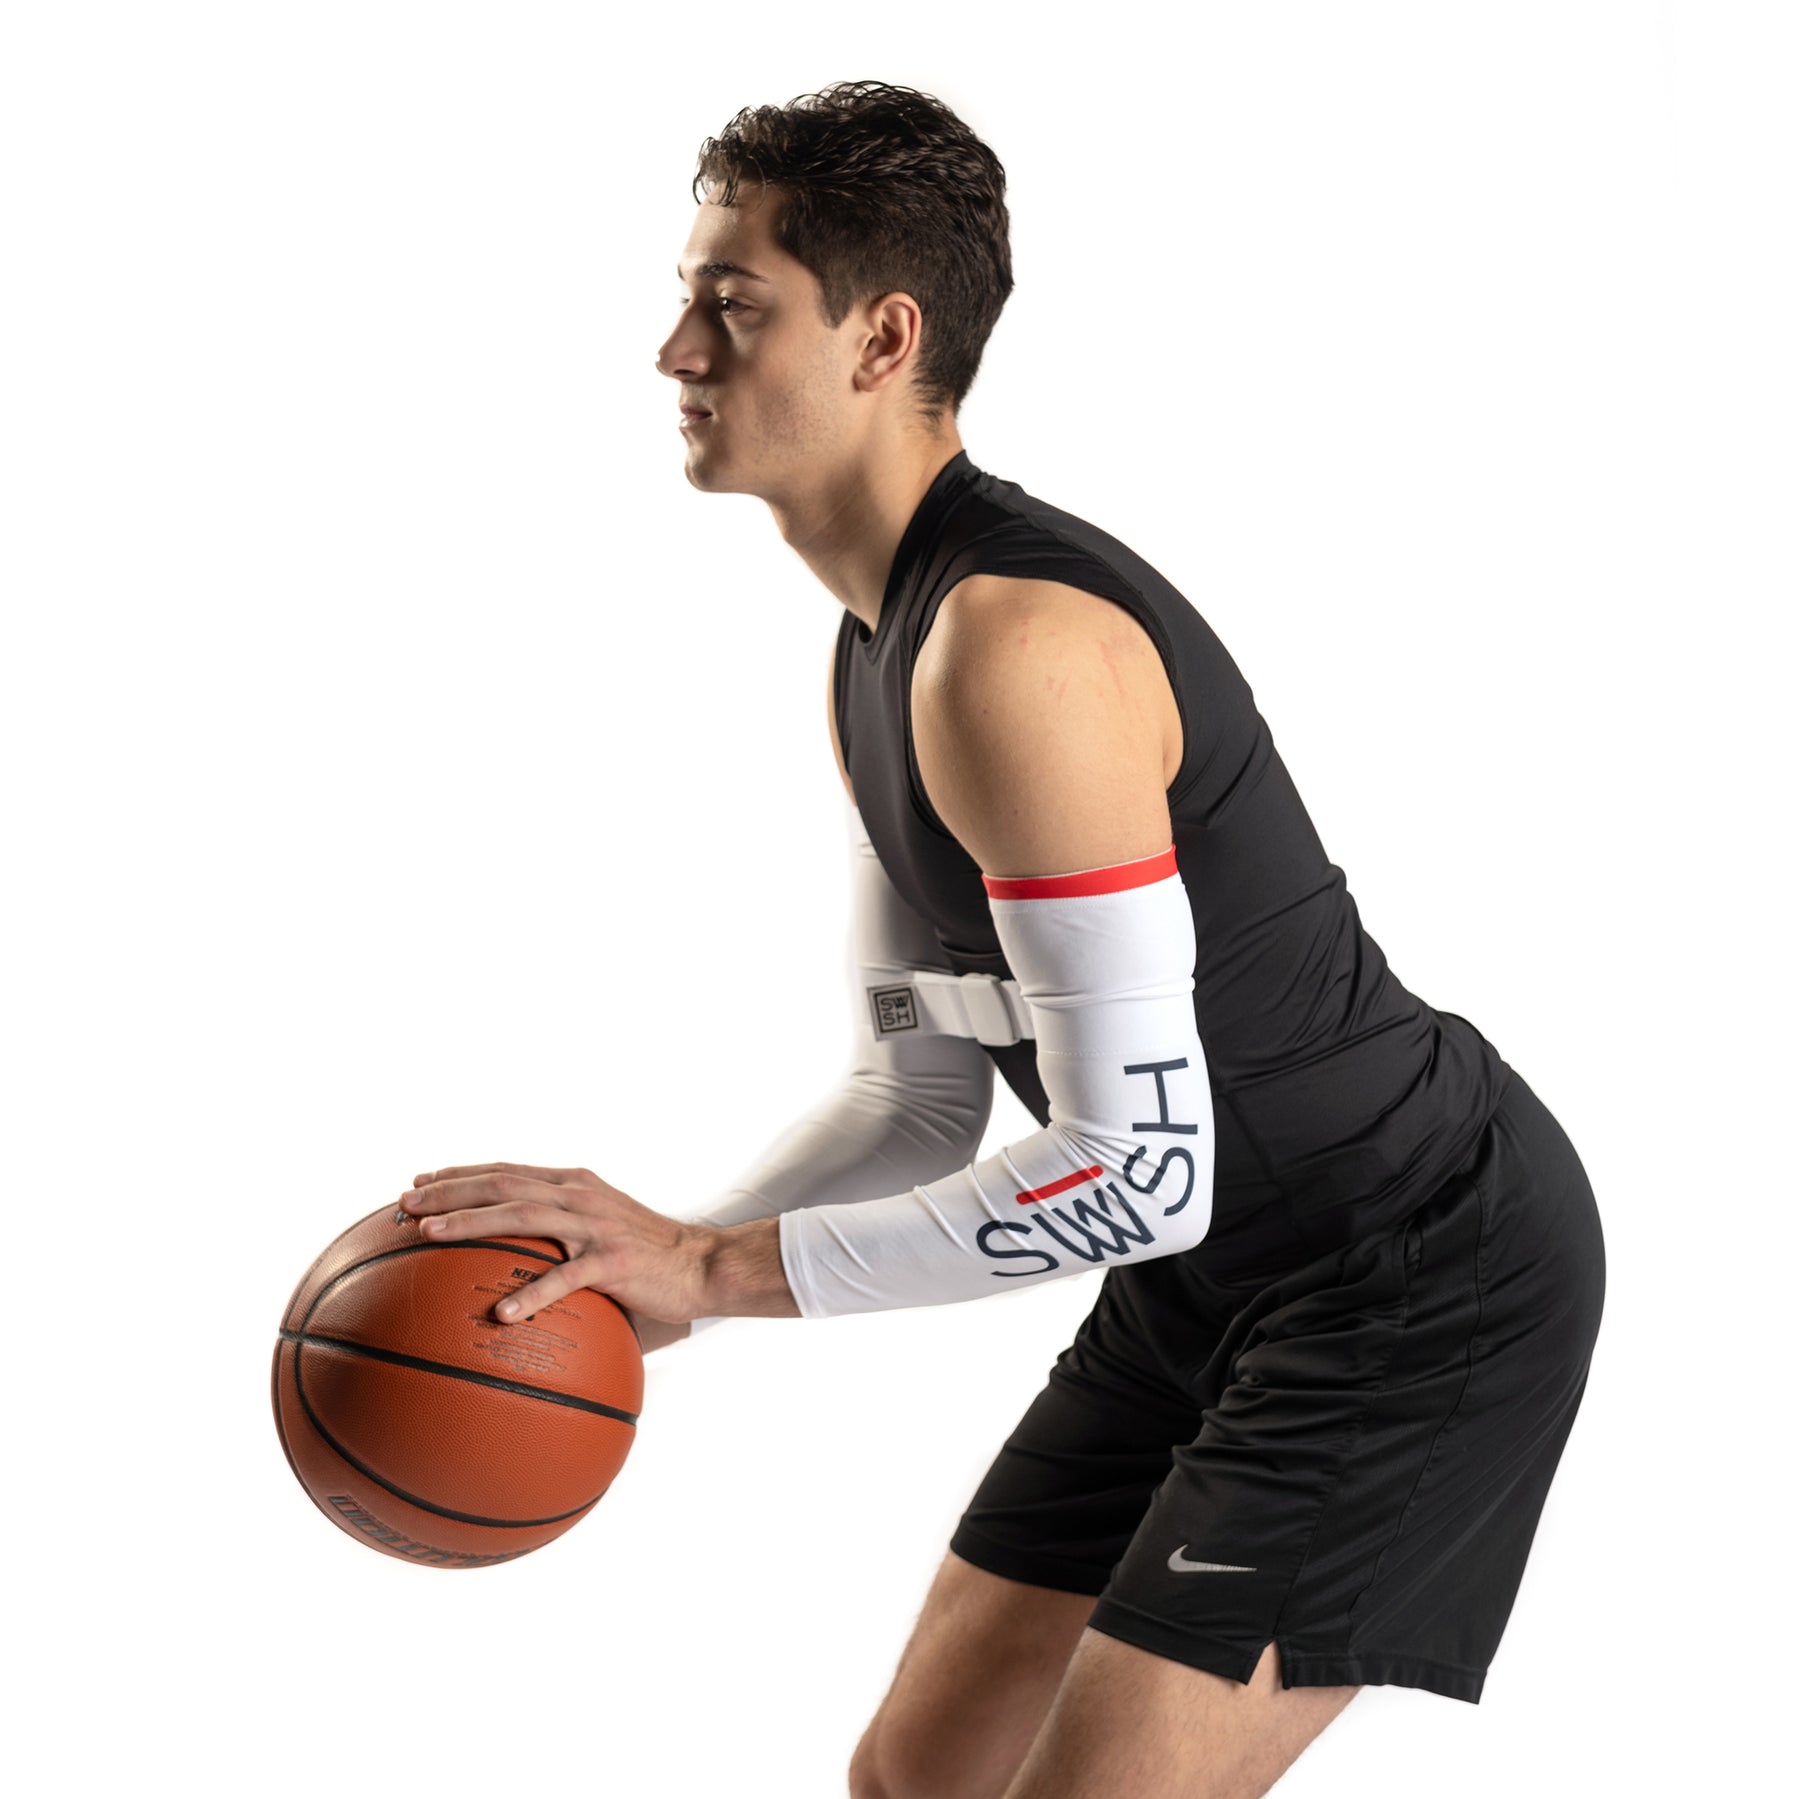 What Is the Purpose of a Basketball Sleeve?